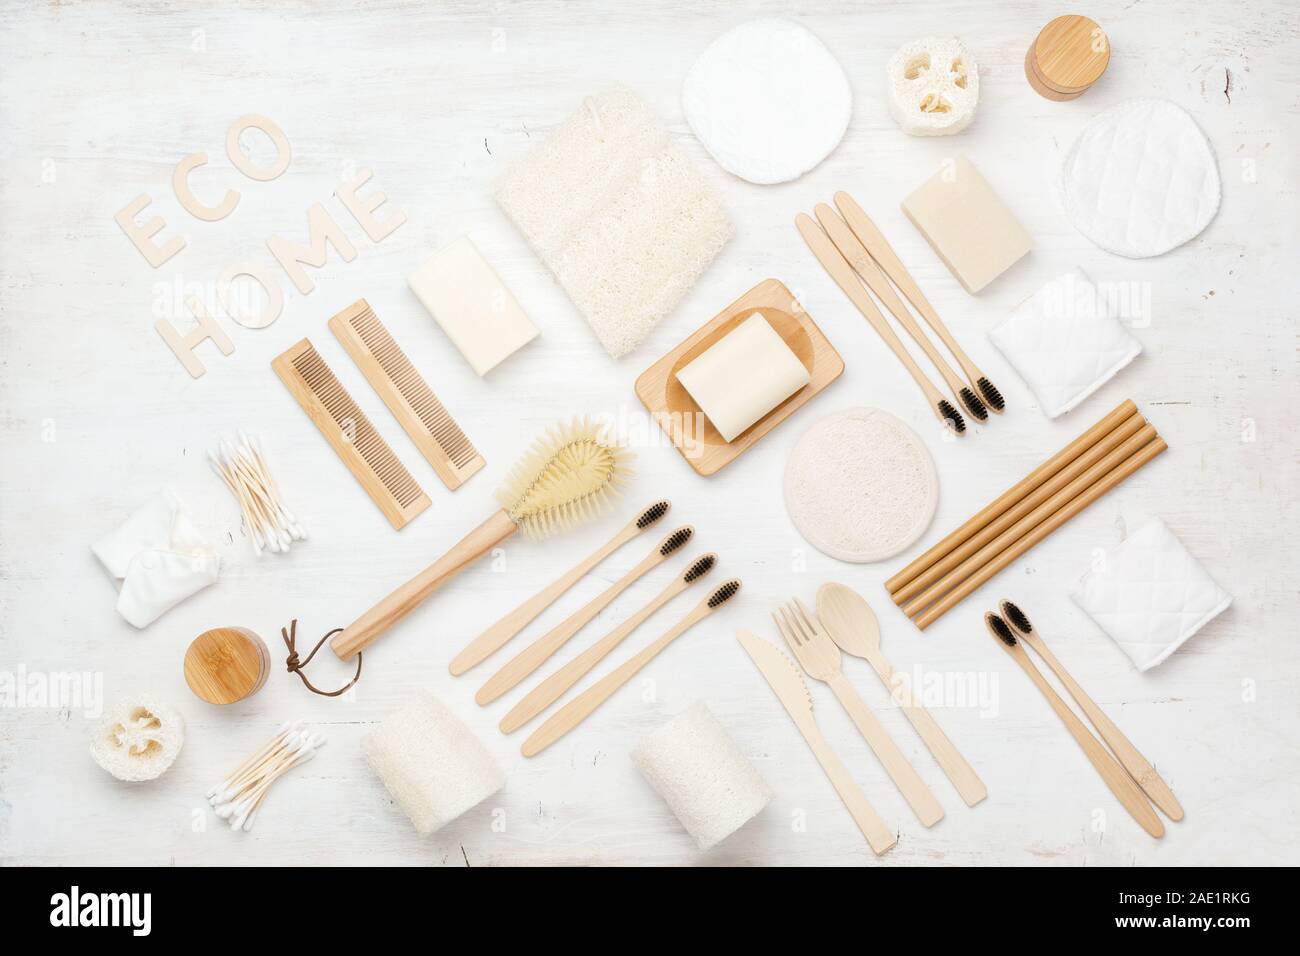 Eco living concept, Creative flatlay with natural biodegradable accessories. Bamboo toothbrushes, handmade soap shampoo bars, cotton buds pads, hygiene products luffa on white, top view Stock Photo